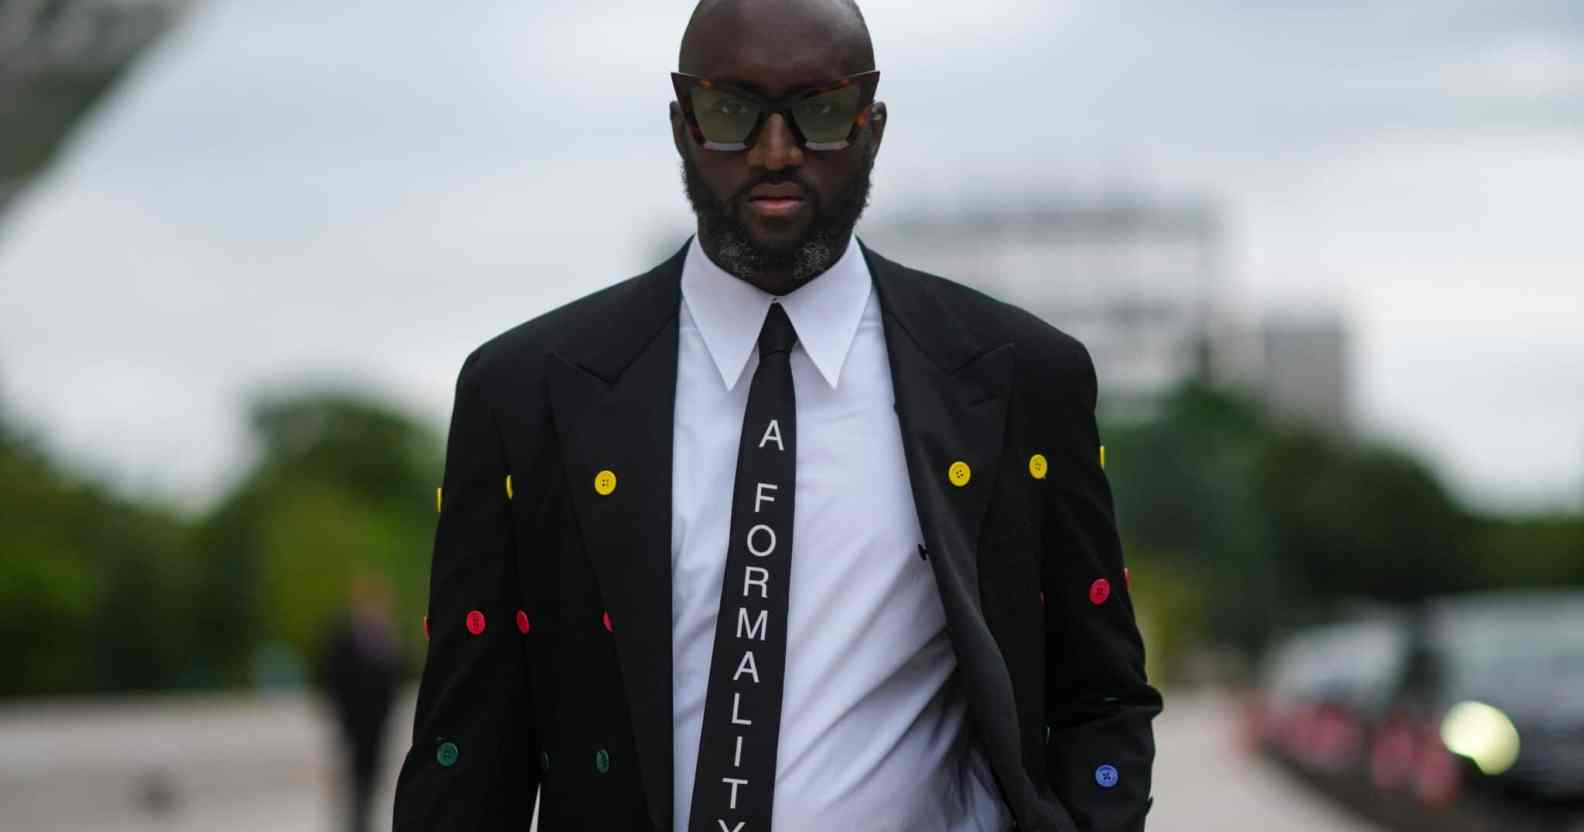 Tributes are paid to Virgil Abloh, who died at the age of 41